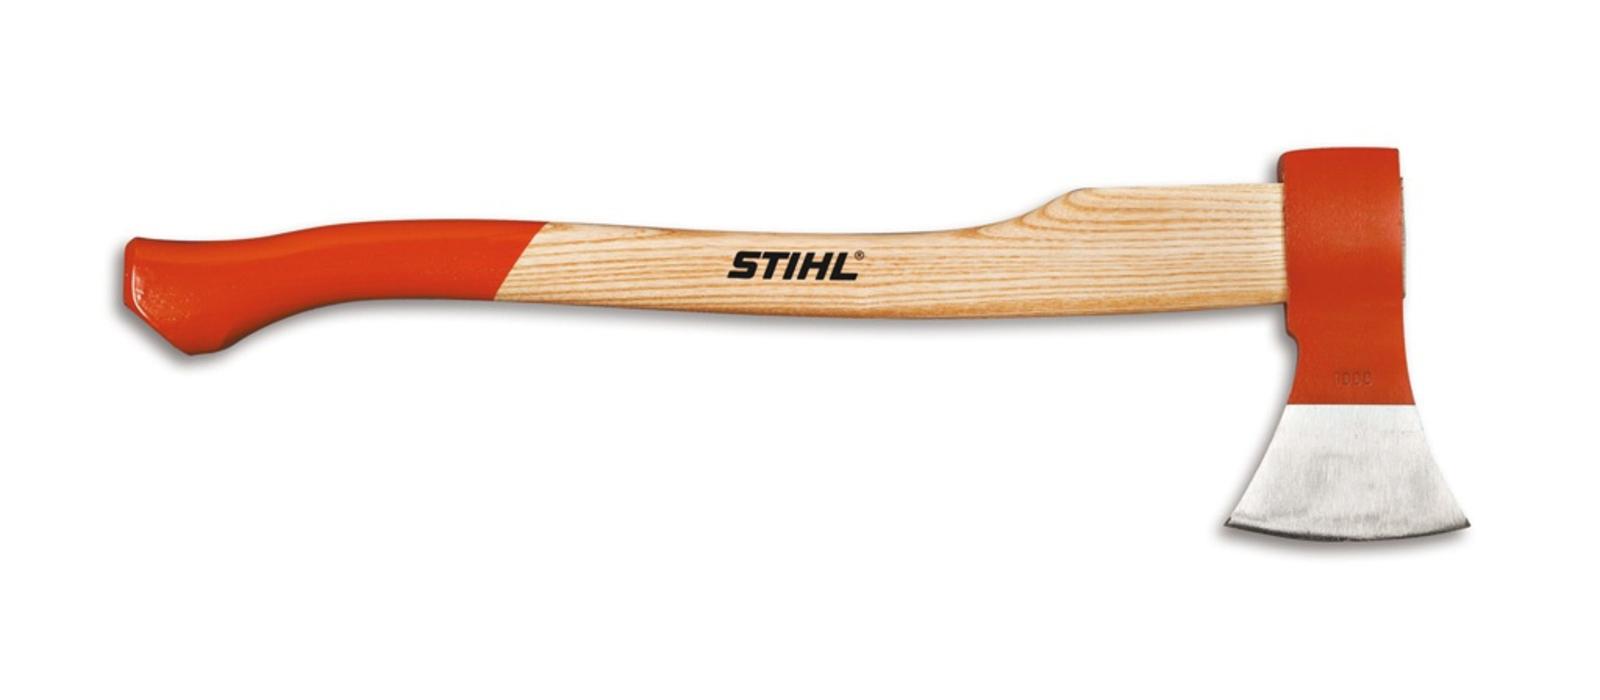 STIHL WOODCUTTER FORESTRY AXE